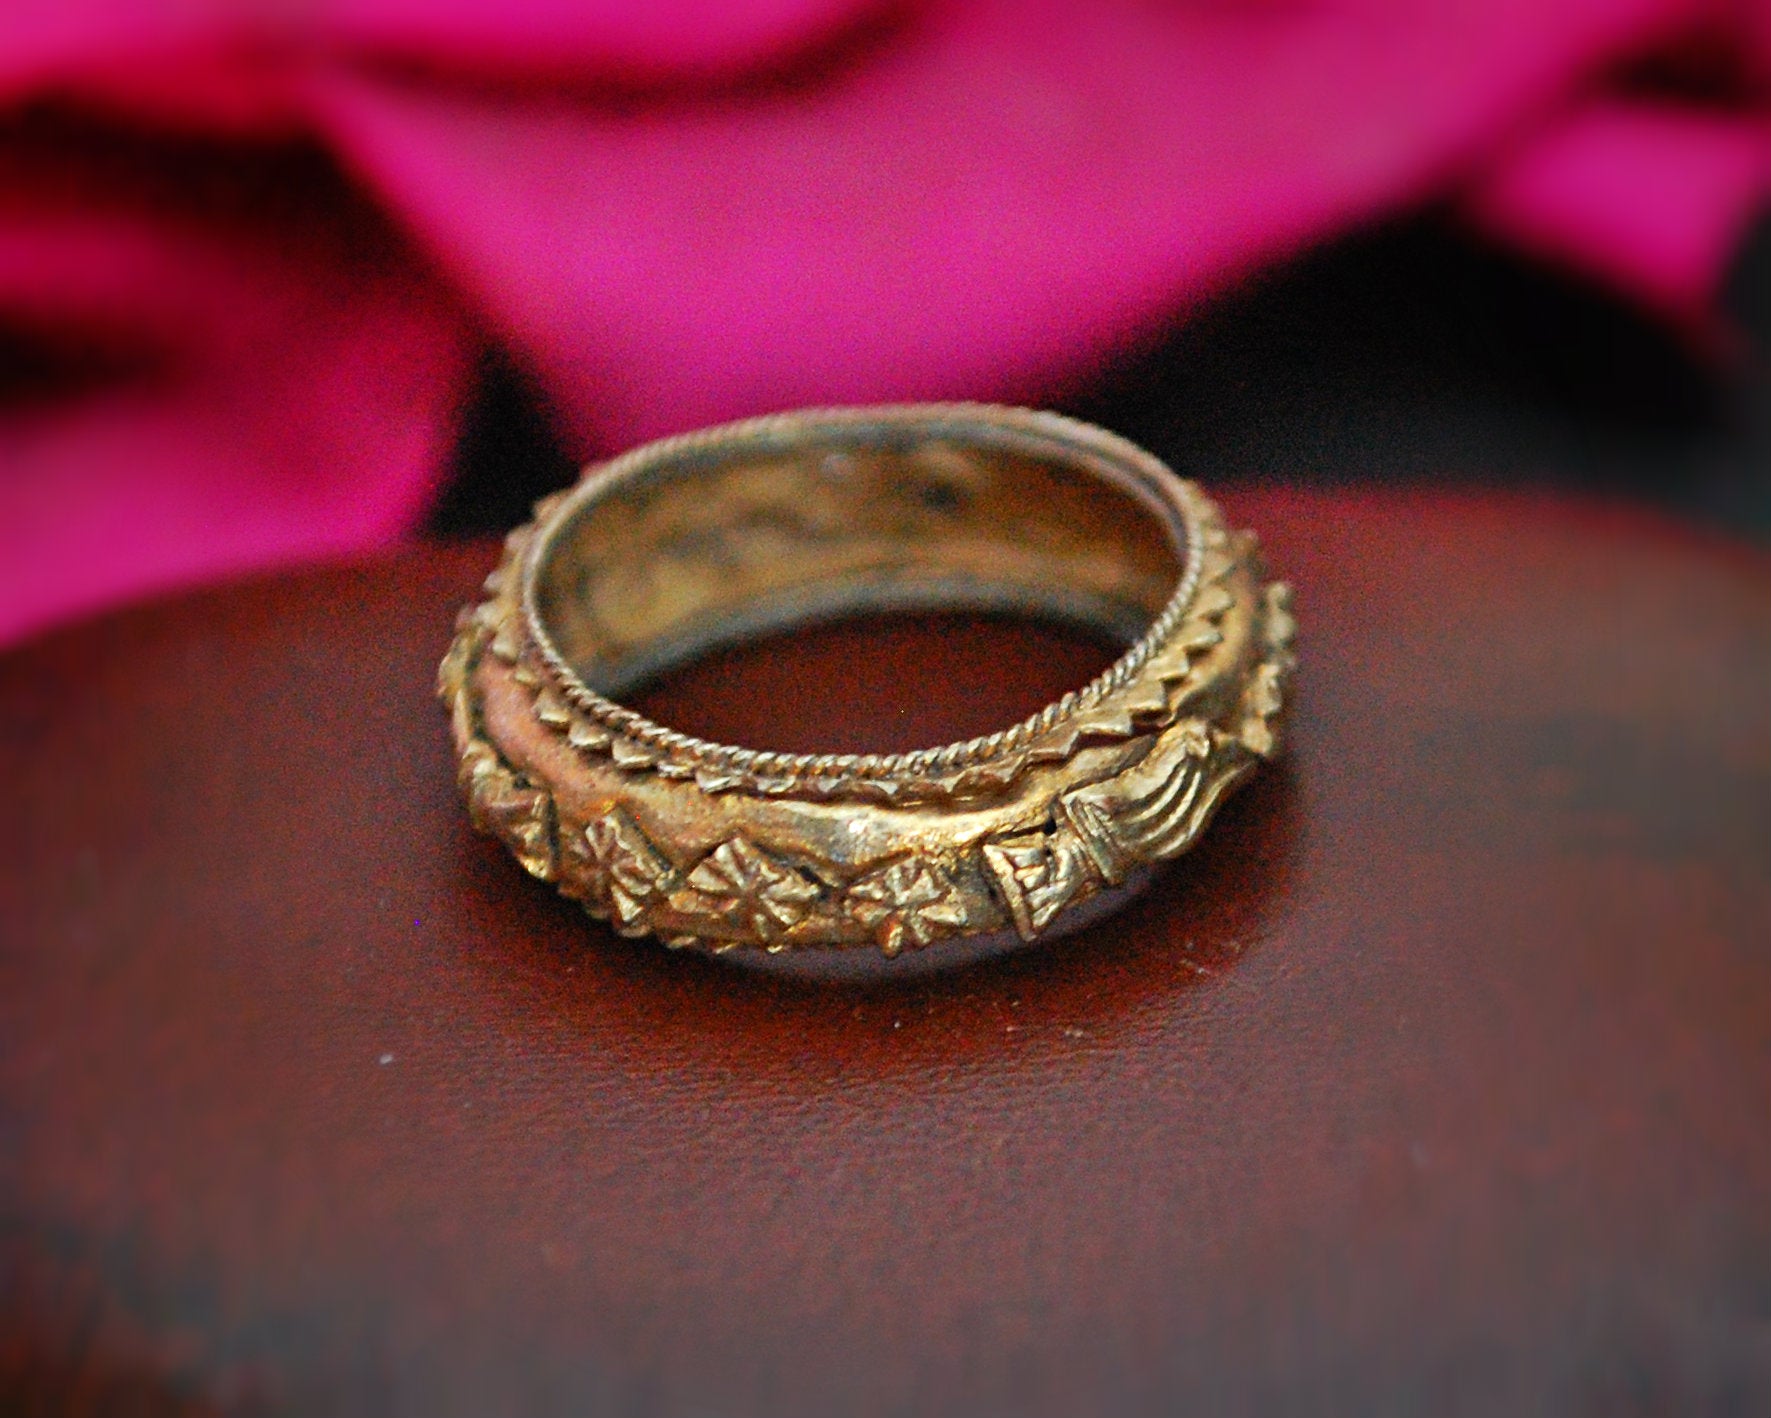 Indonesian Gilded Band Ring - Size 5.5